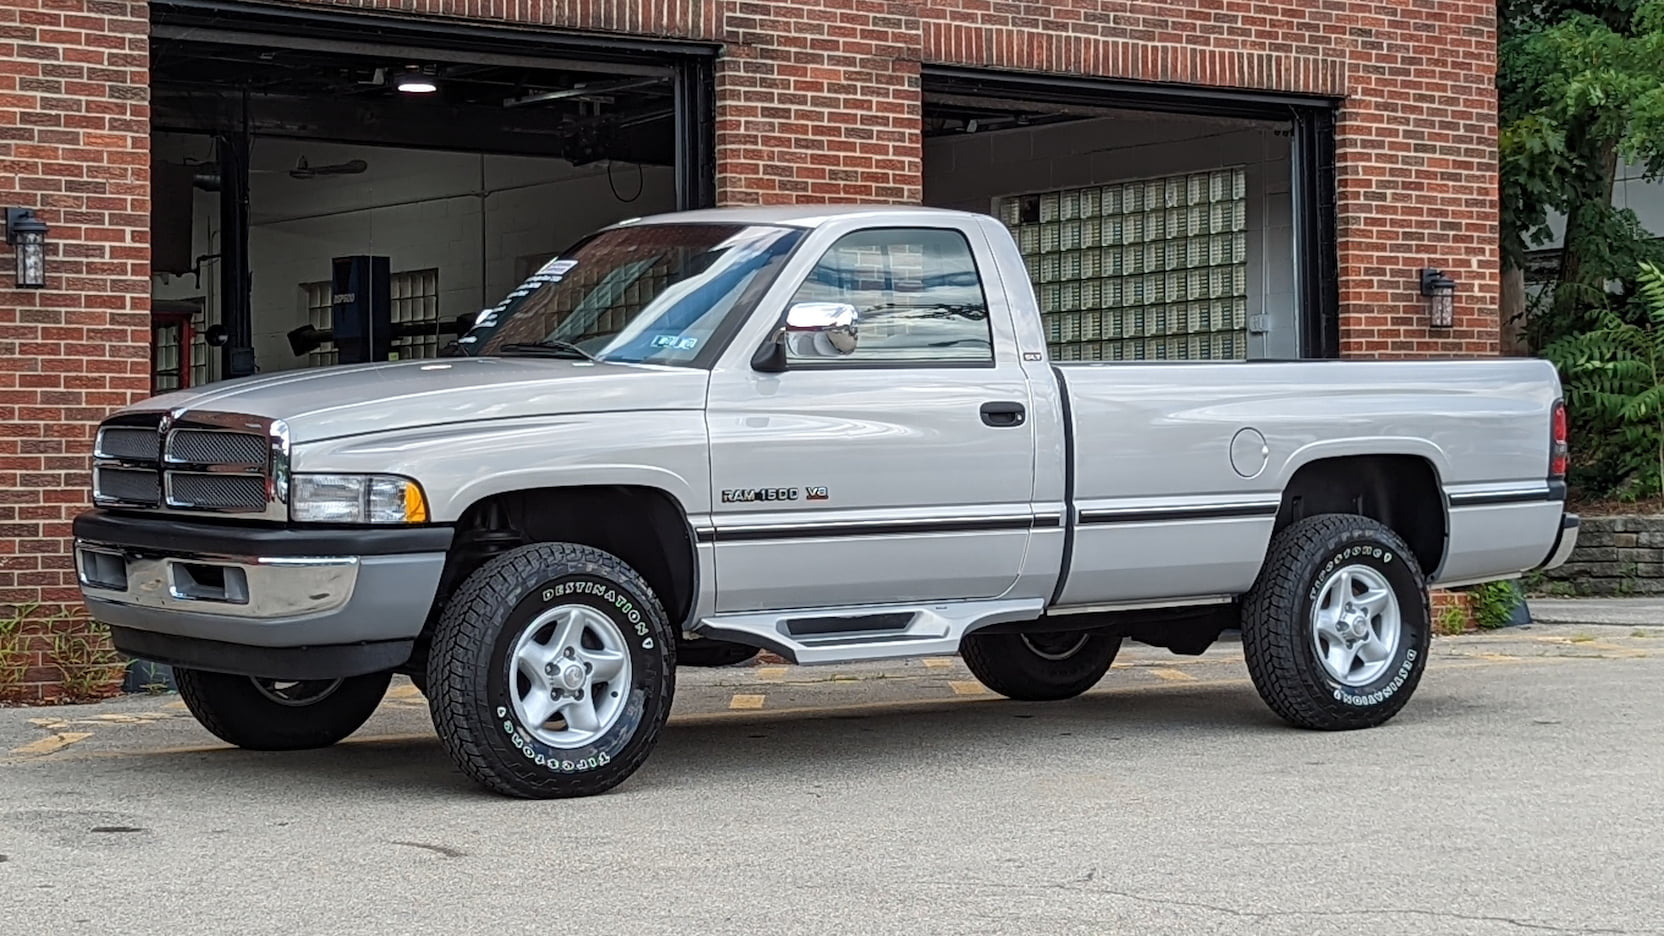 Pase para saber Jabón Tableta AUCTION: This Handsome 1997 Dodge Ram 1500 Only Has 16,576 Miles On The  Odometer! - MoparInsiders